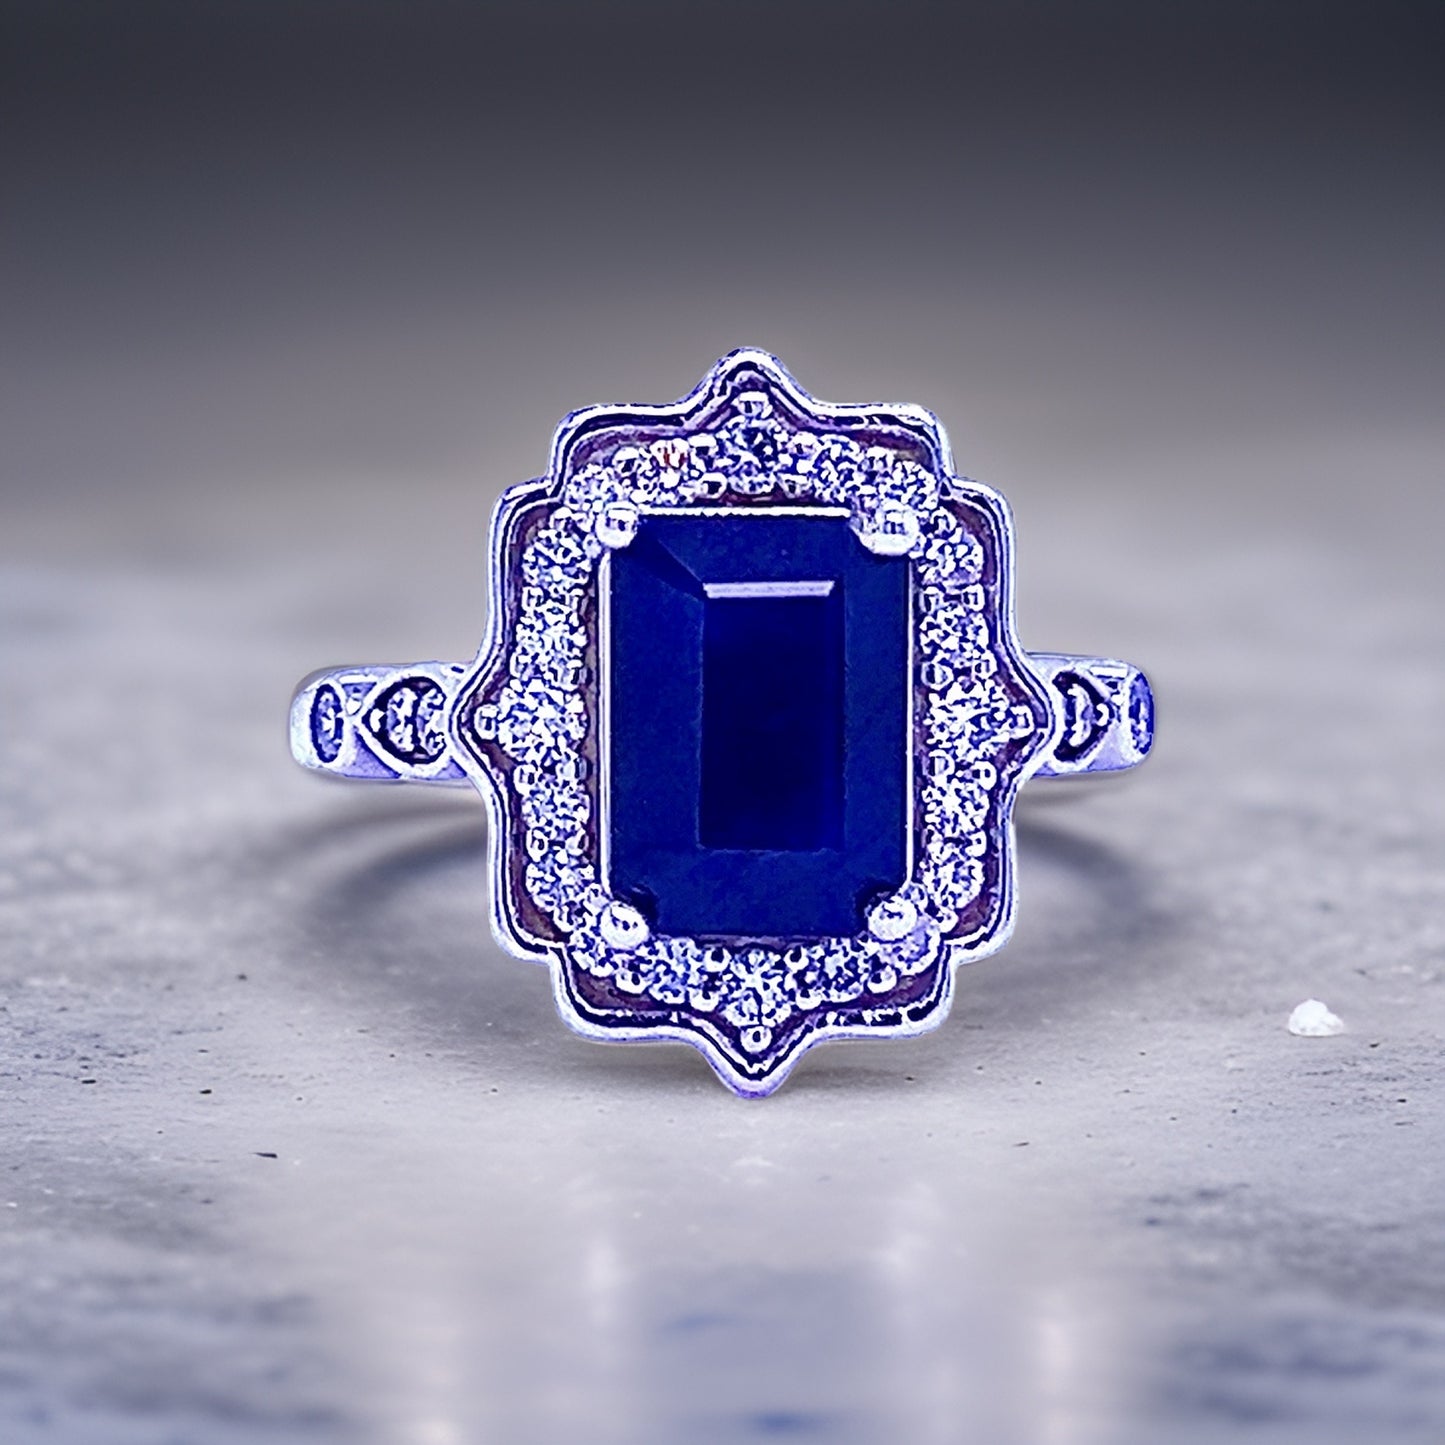 Natural Sapphire Diamond Ring 6.5 14k White Gold 3.51 TCW Certified $2,950 300214 - Certified Fine Jewelry